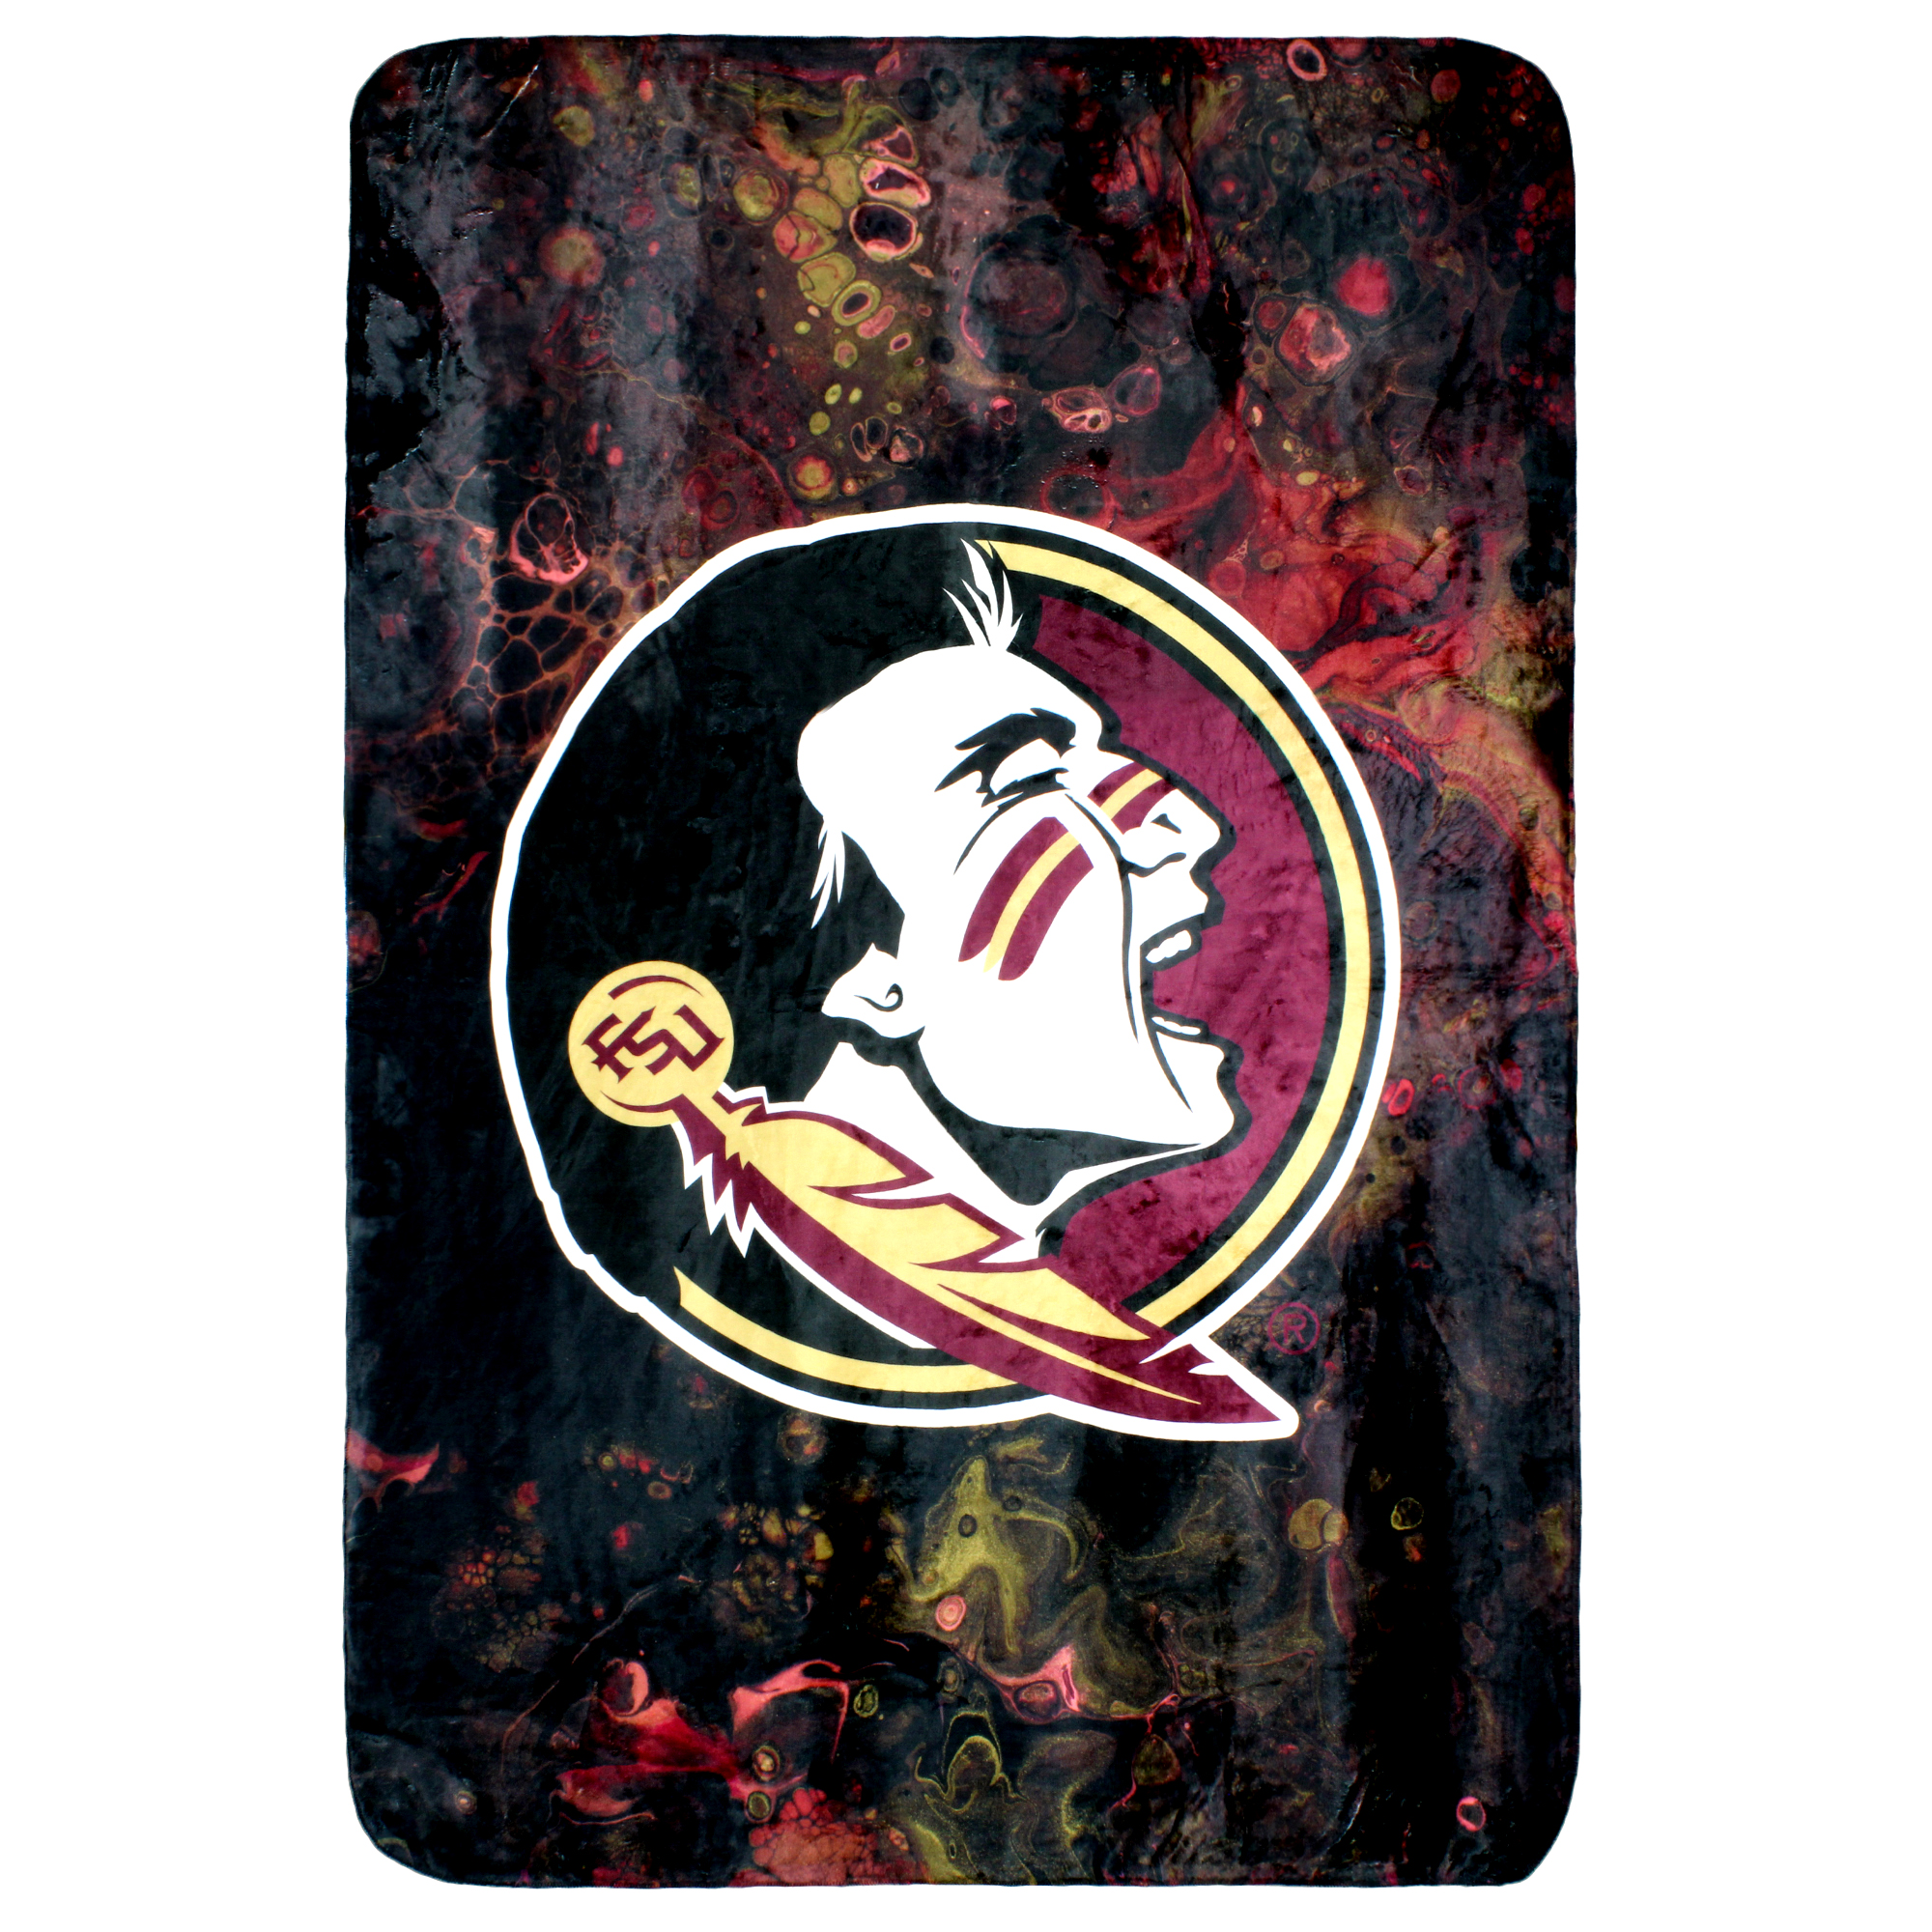 College Covers Florida State Seminoles Sublimated Soft Throw Blanket, 42" x 60" - image 1 of 5